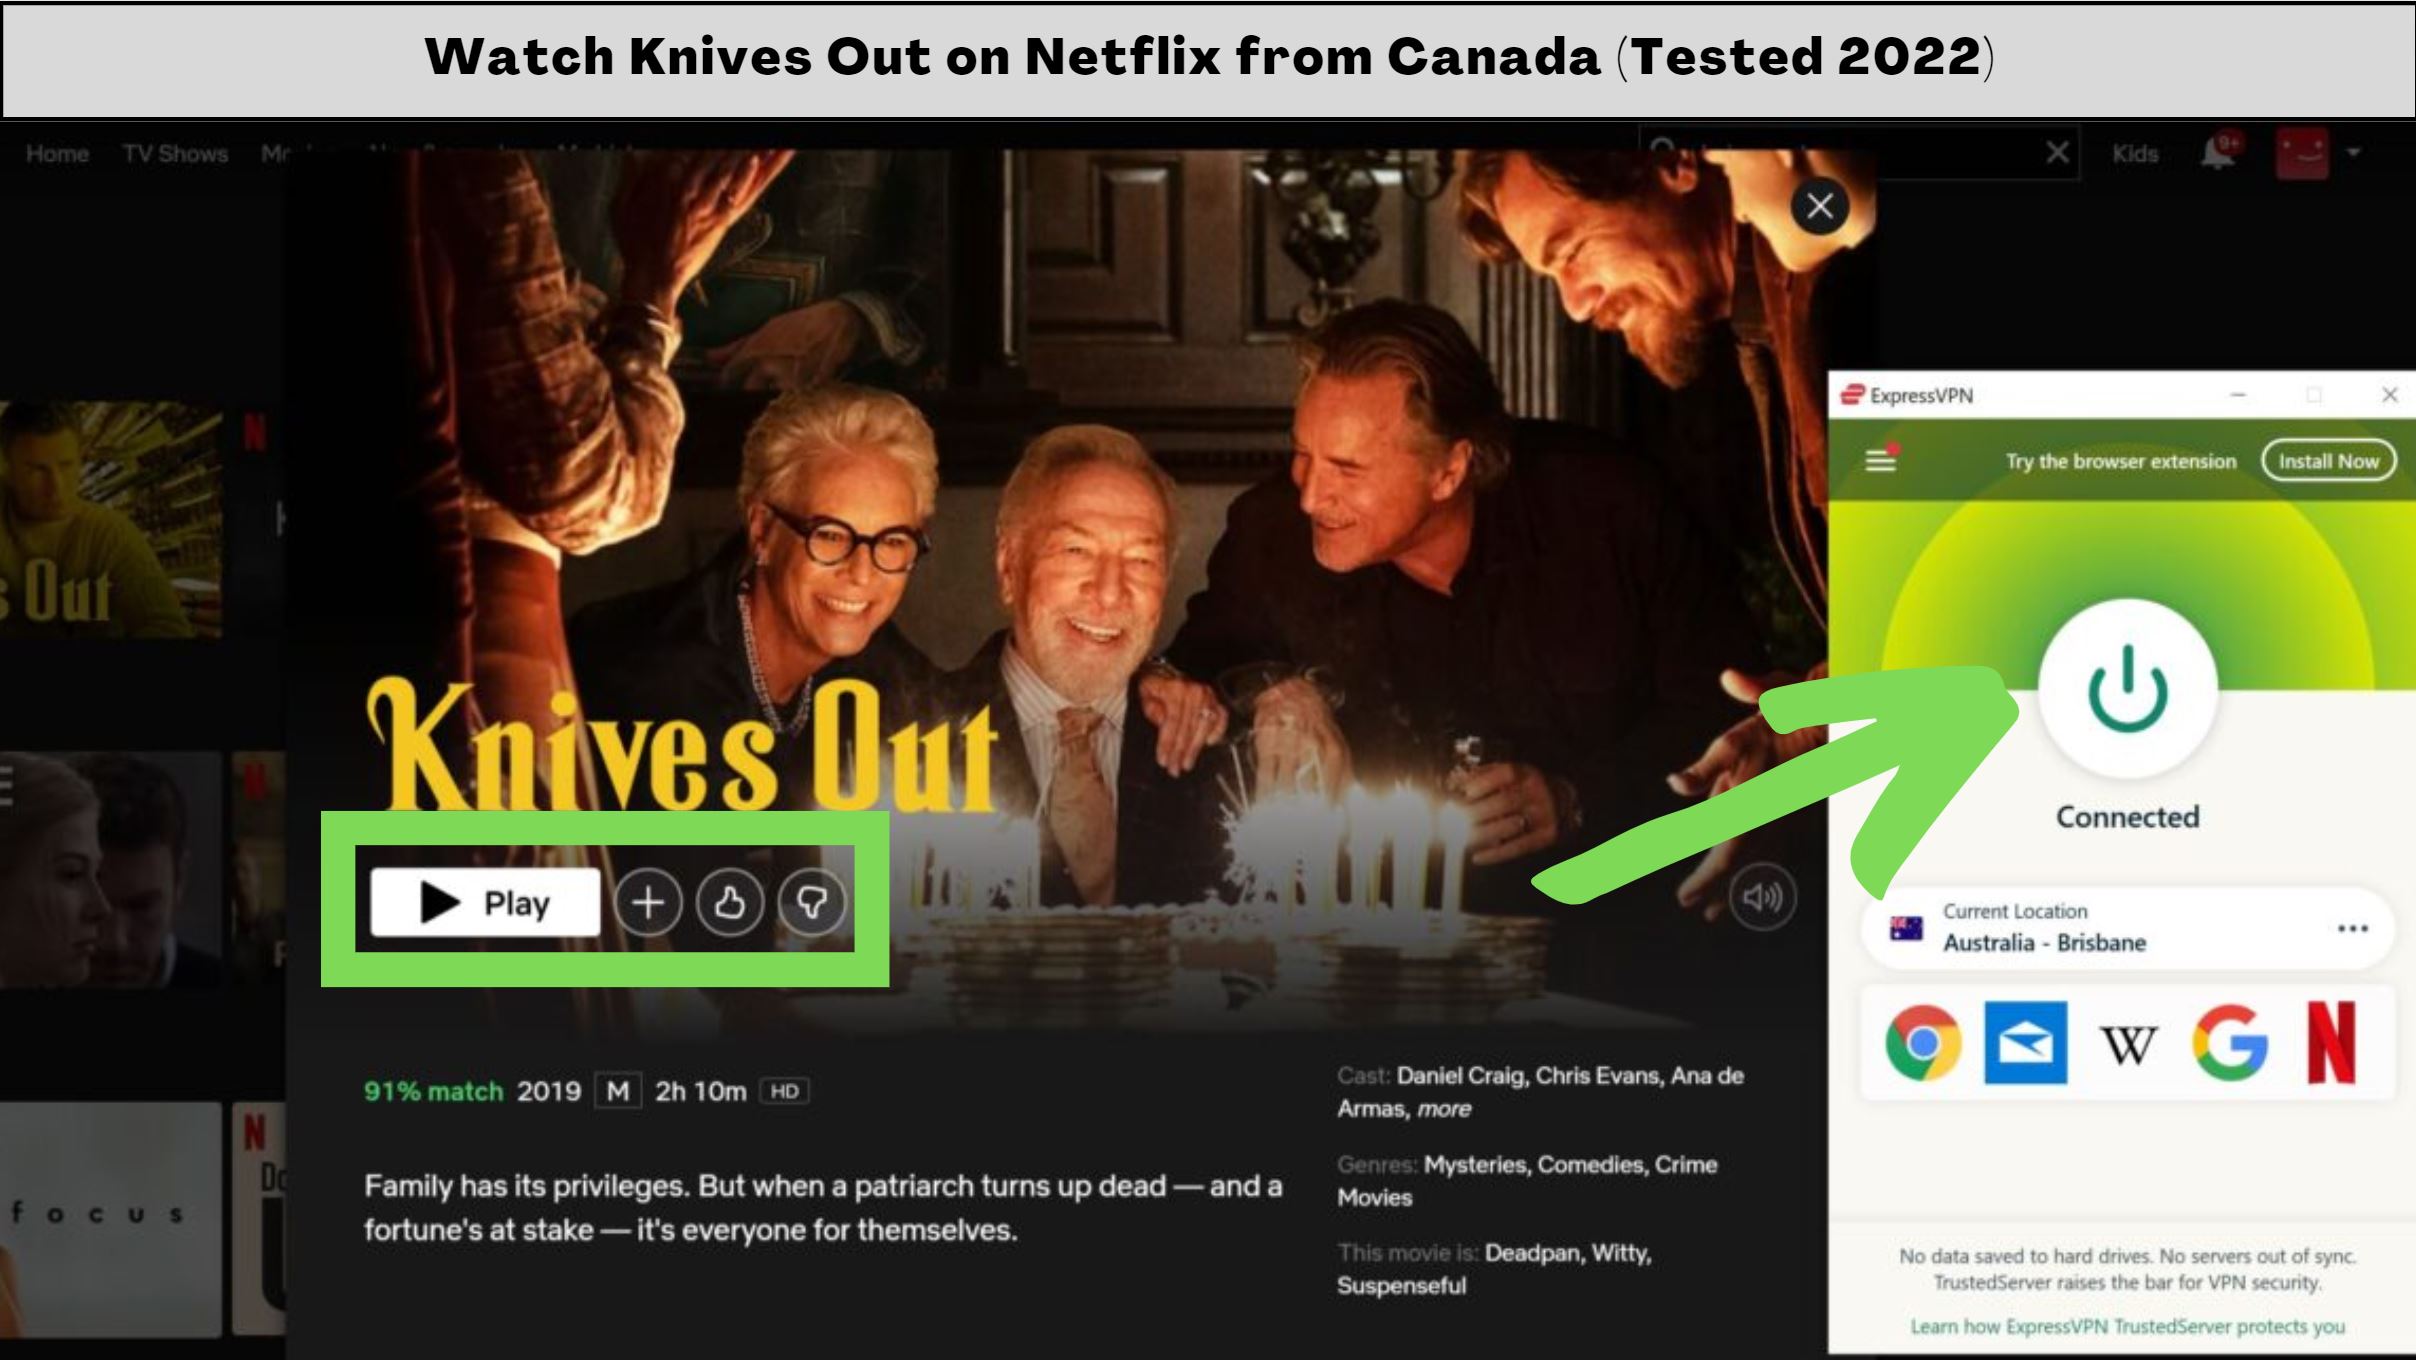 Is Knives Out on Netflix